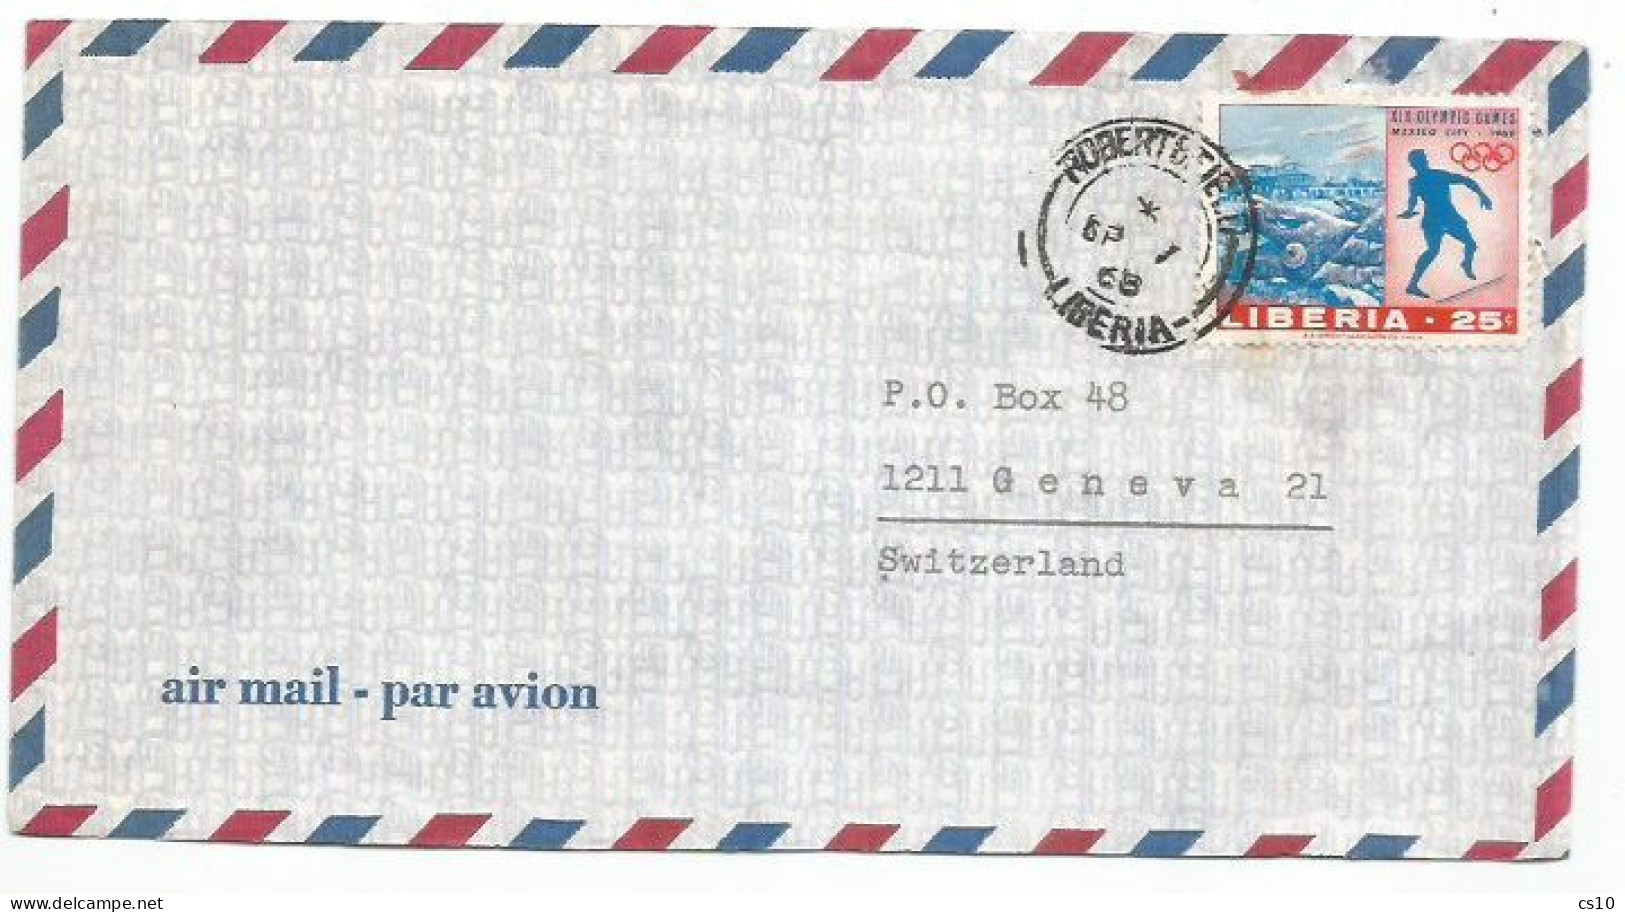 Liberia Airmail Cover Robertsfield 7sep1968 X Suisse With Olympic Games Mexico 1968 C.25 Discus Throw Solo Franking - Athlétisme